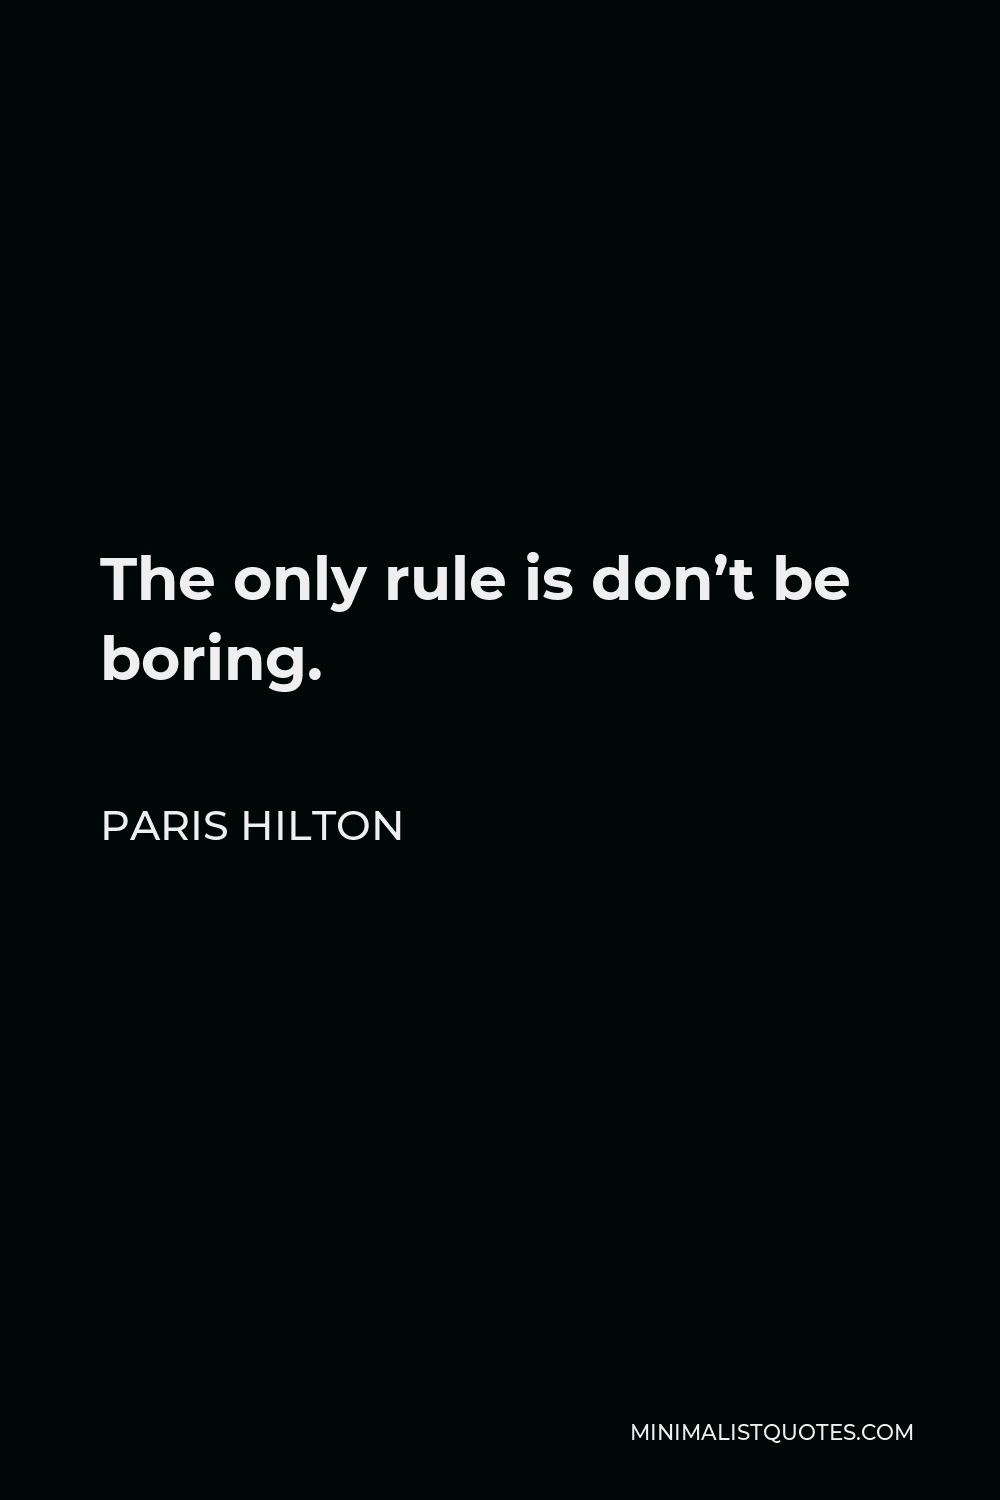 Paris Hilton Quote - The only rule is don’t be boring.